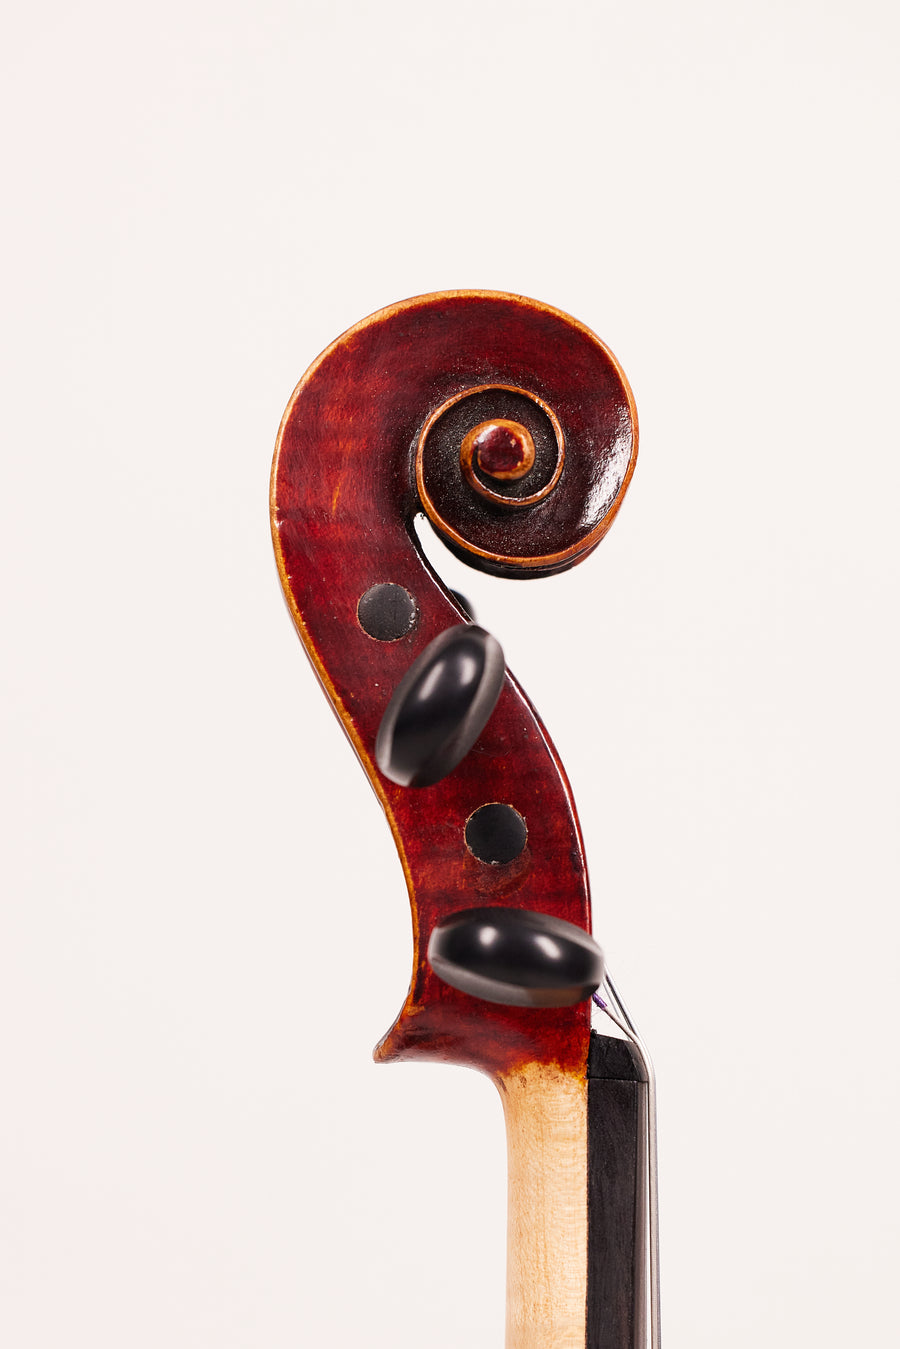 An Early 19th C. Mittenwald Violin Attributed To Josef Sailor, 1824.